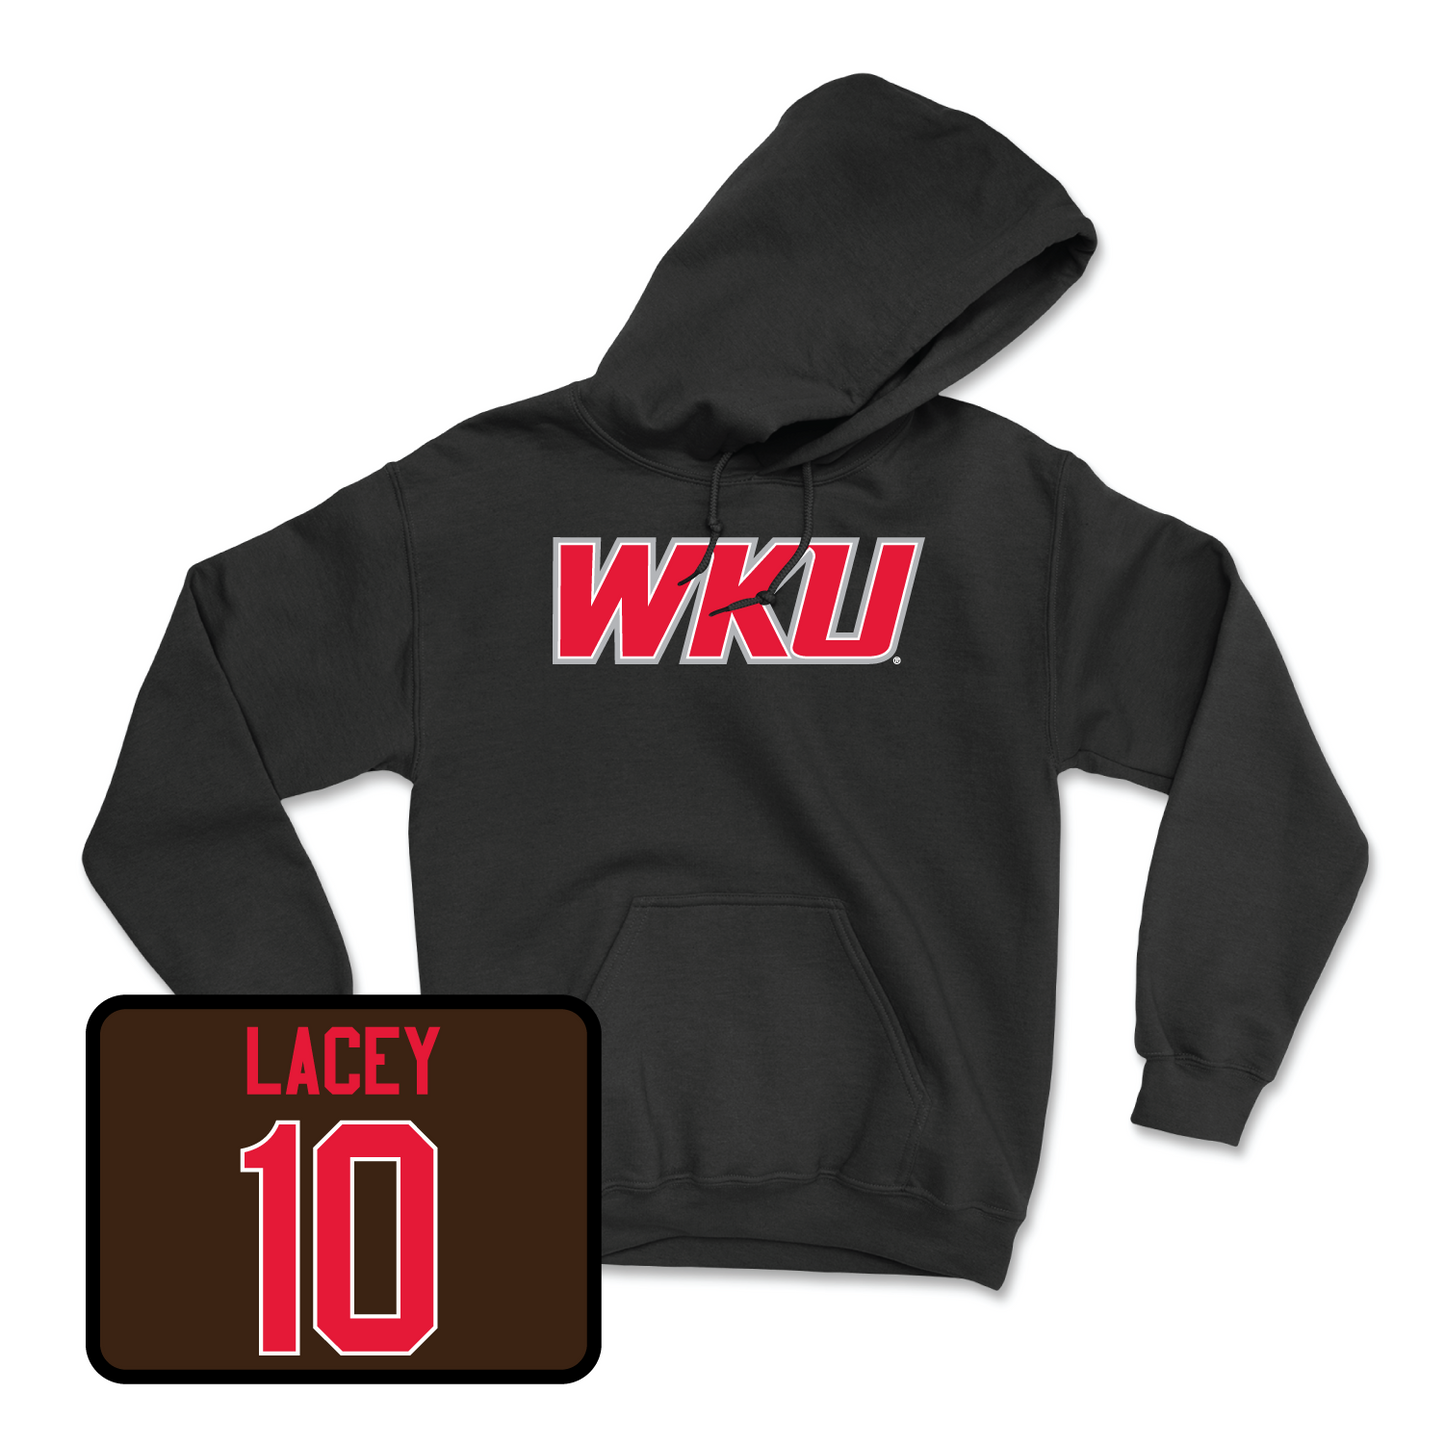 Black Women's Soccer WKU Hoodie 3 Youth Large / Paige Lacey | #10